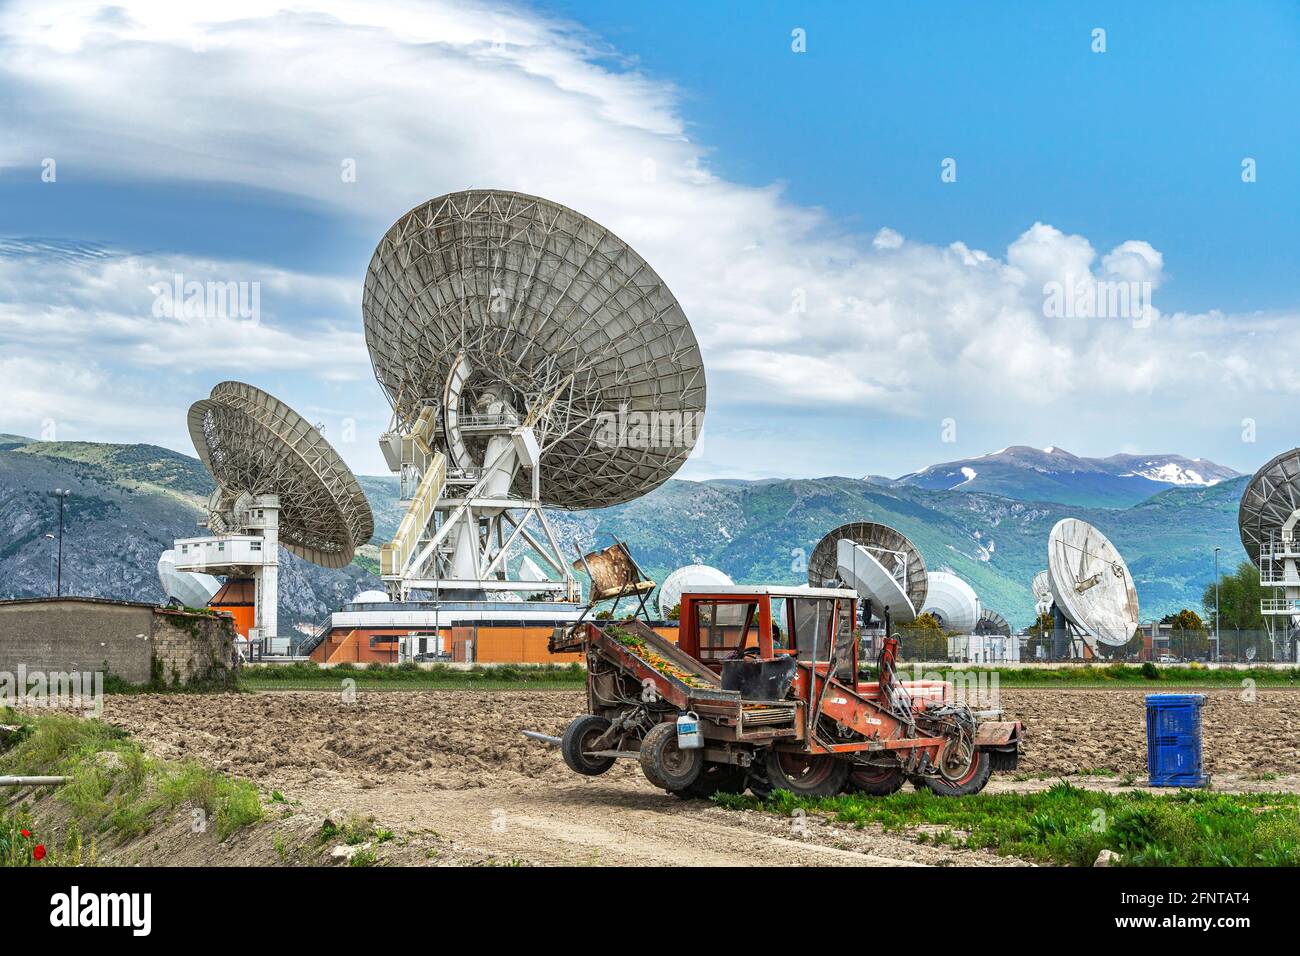 Contrasts of technologies in the Fucino plain. Satellite communication antennas and farm workers who collect carrots. Fucino, Abruzzo, Italy, Europe Stock Photo